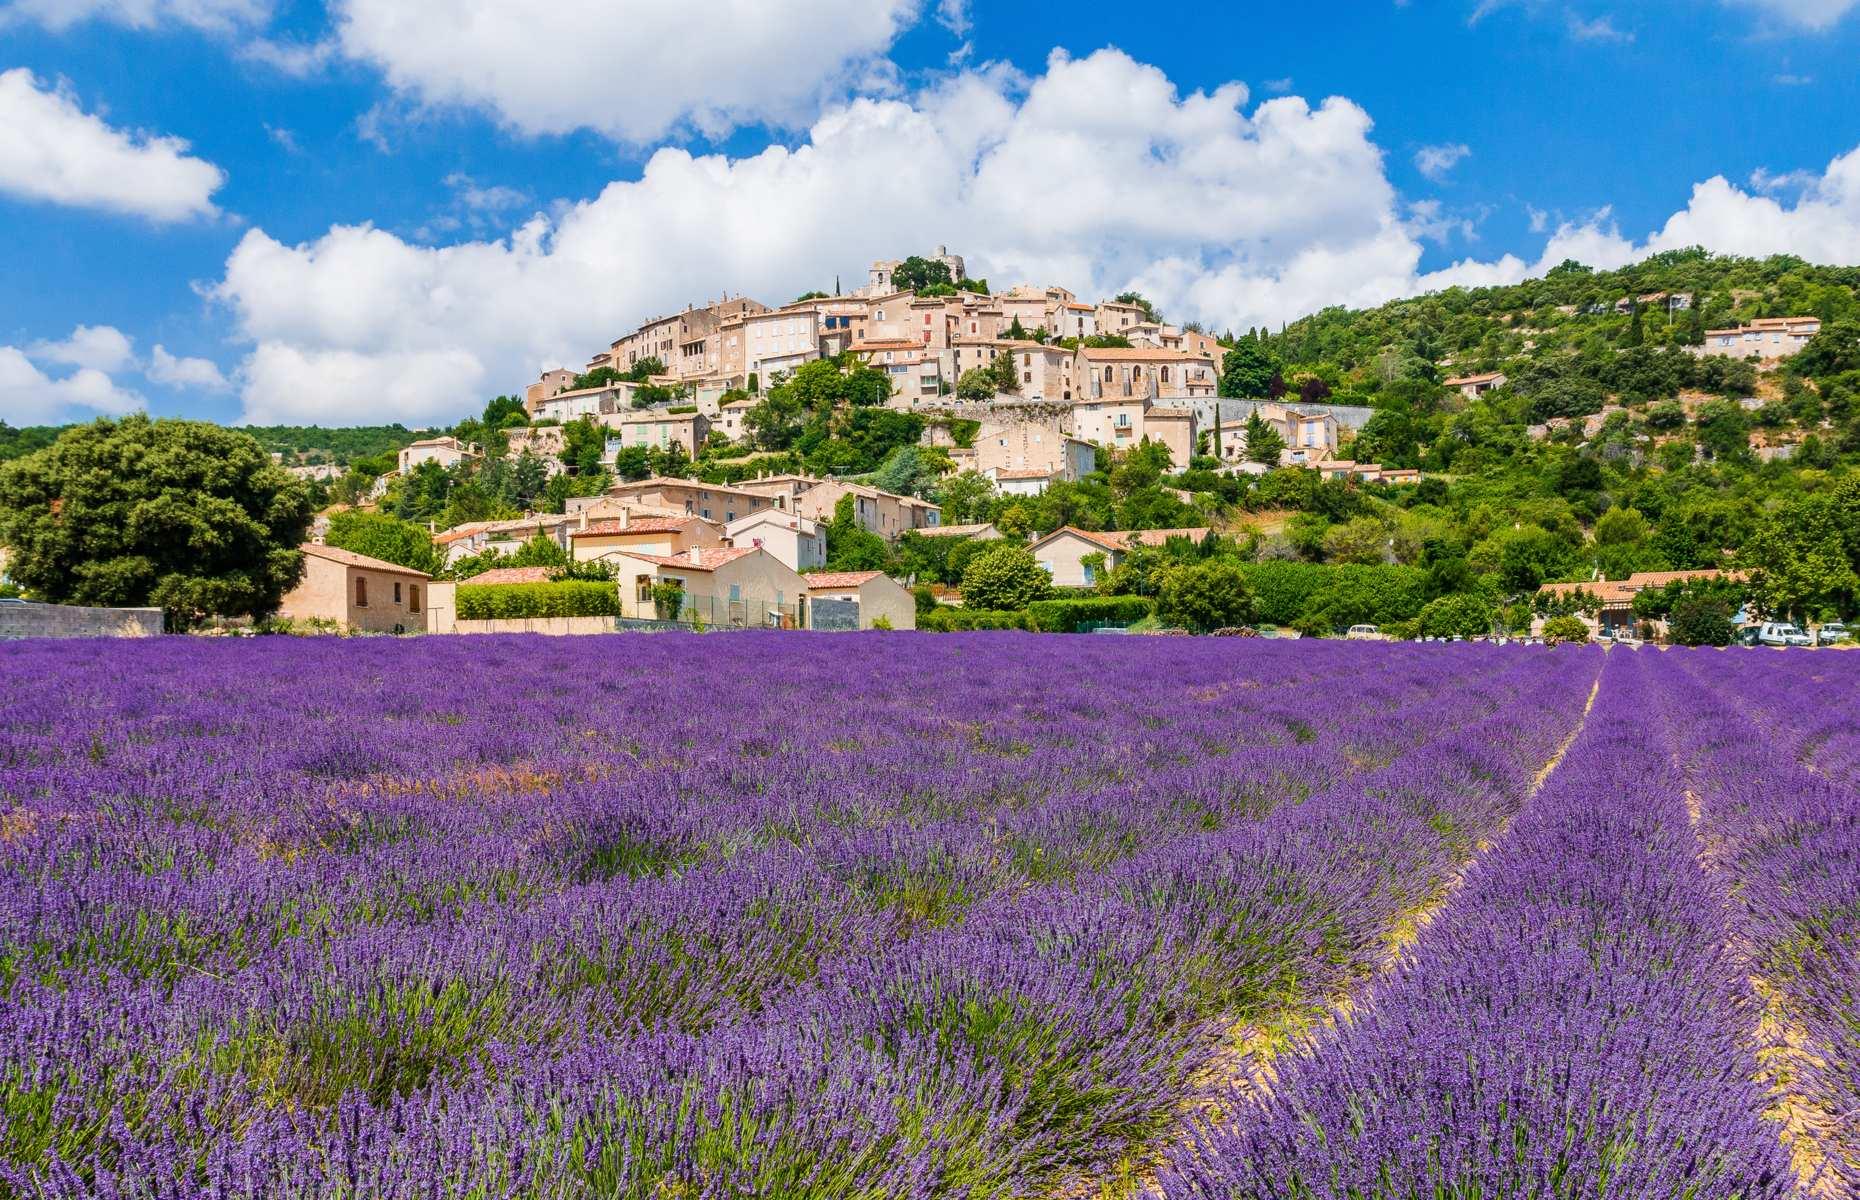 The hilltop commune of Simiane la Rotonde looks especially striking during the summer, when it sits above a luxurious rug of Provençal lavender. It owes its name to the rotunda of a 12th-century castle perched at the top of the hill, which currently serves as the setting for the annual Festival of Ancient Music and numerous exhibitions. With its narrow houses stacked onto the steep slopes, the village is as quaint as you can get.